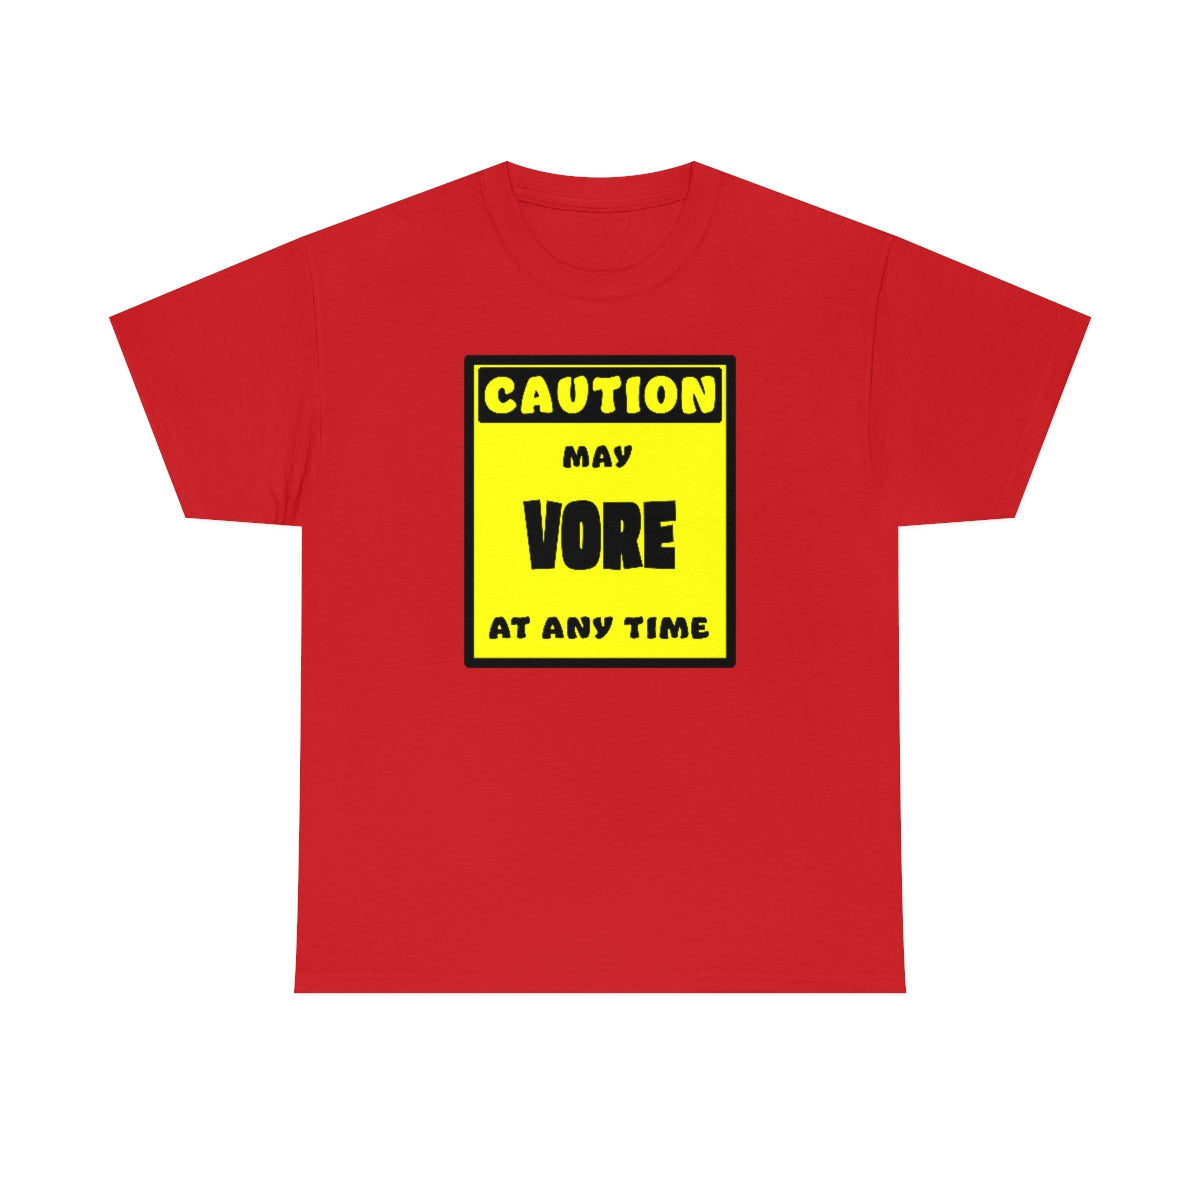 CAUTION! May VORE at any time! - T-Shirt T-Shirt AFLT-Whootorca Red S 